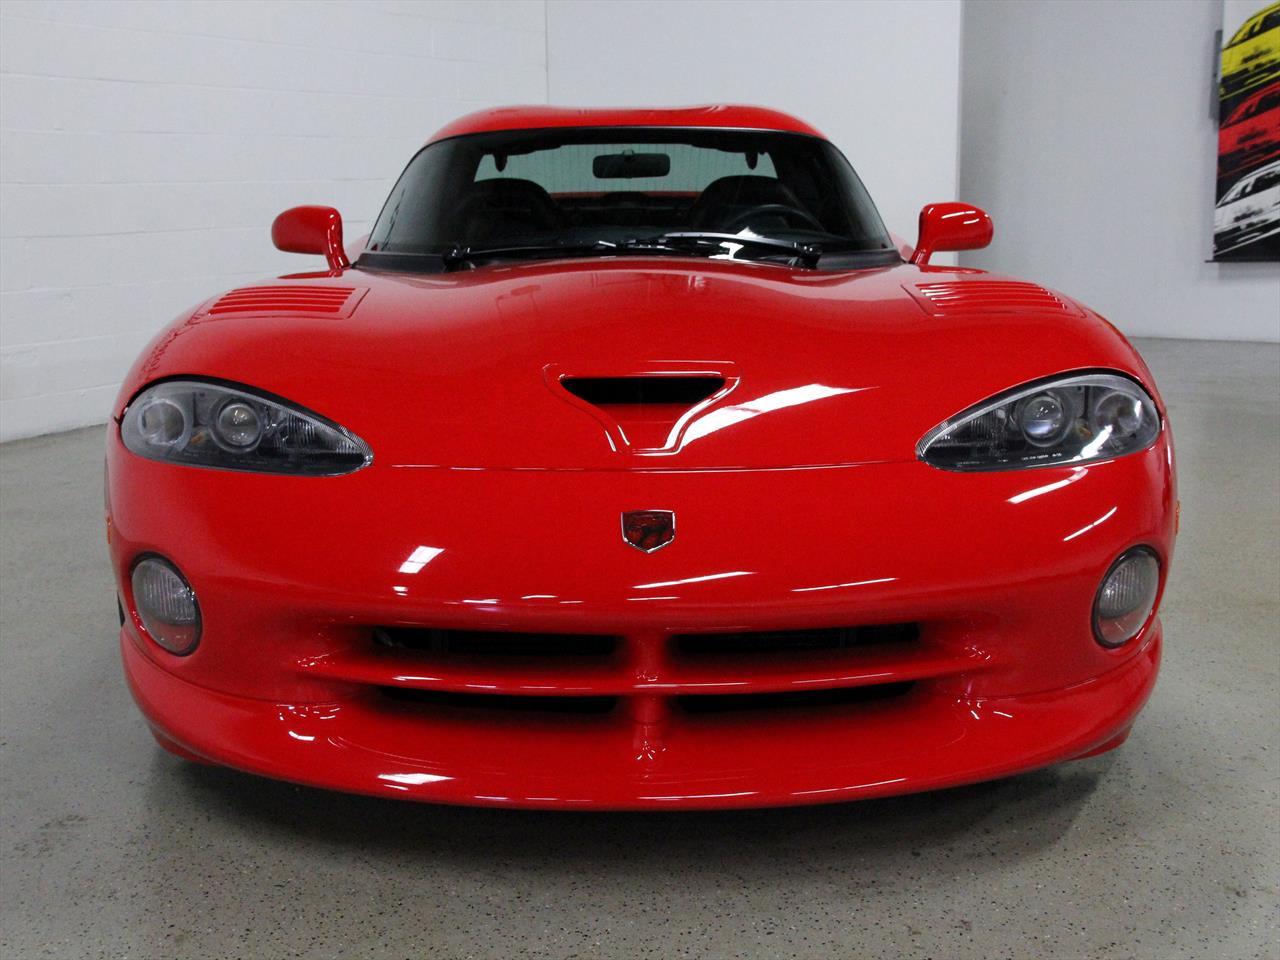 Sell used 1998 Dodge Viper GTS - ONLY 5K Miles! Red/Blk - Custom CCW